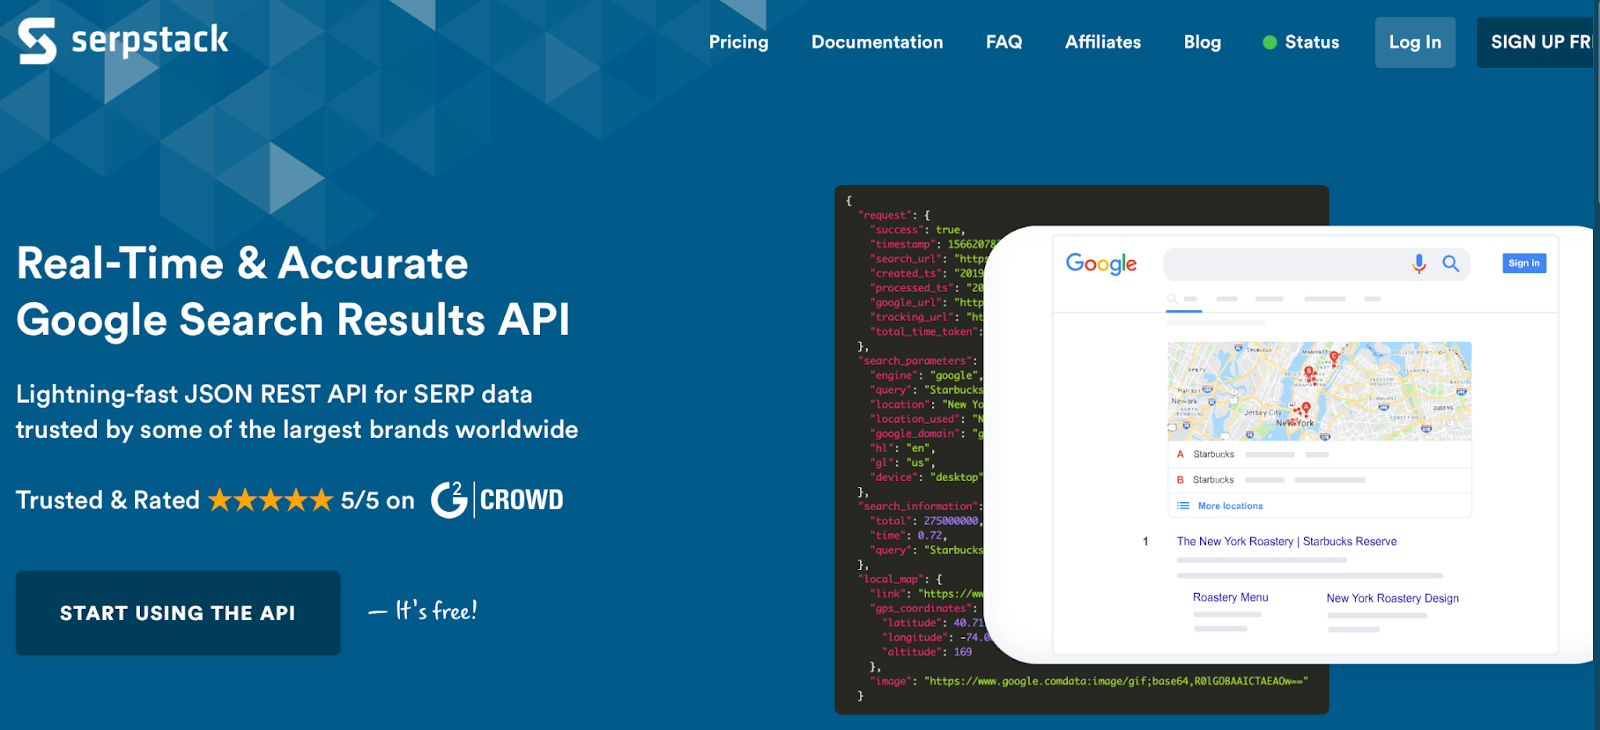 Google Search Results API from Serpstack